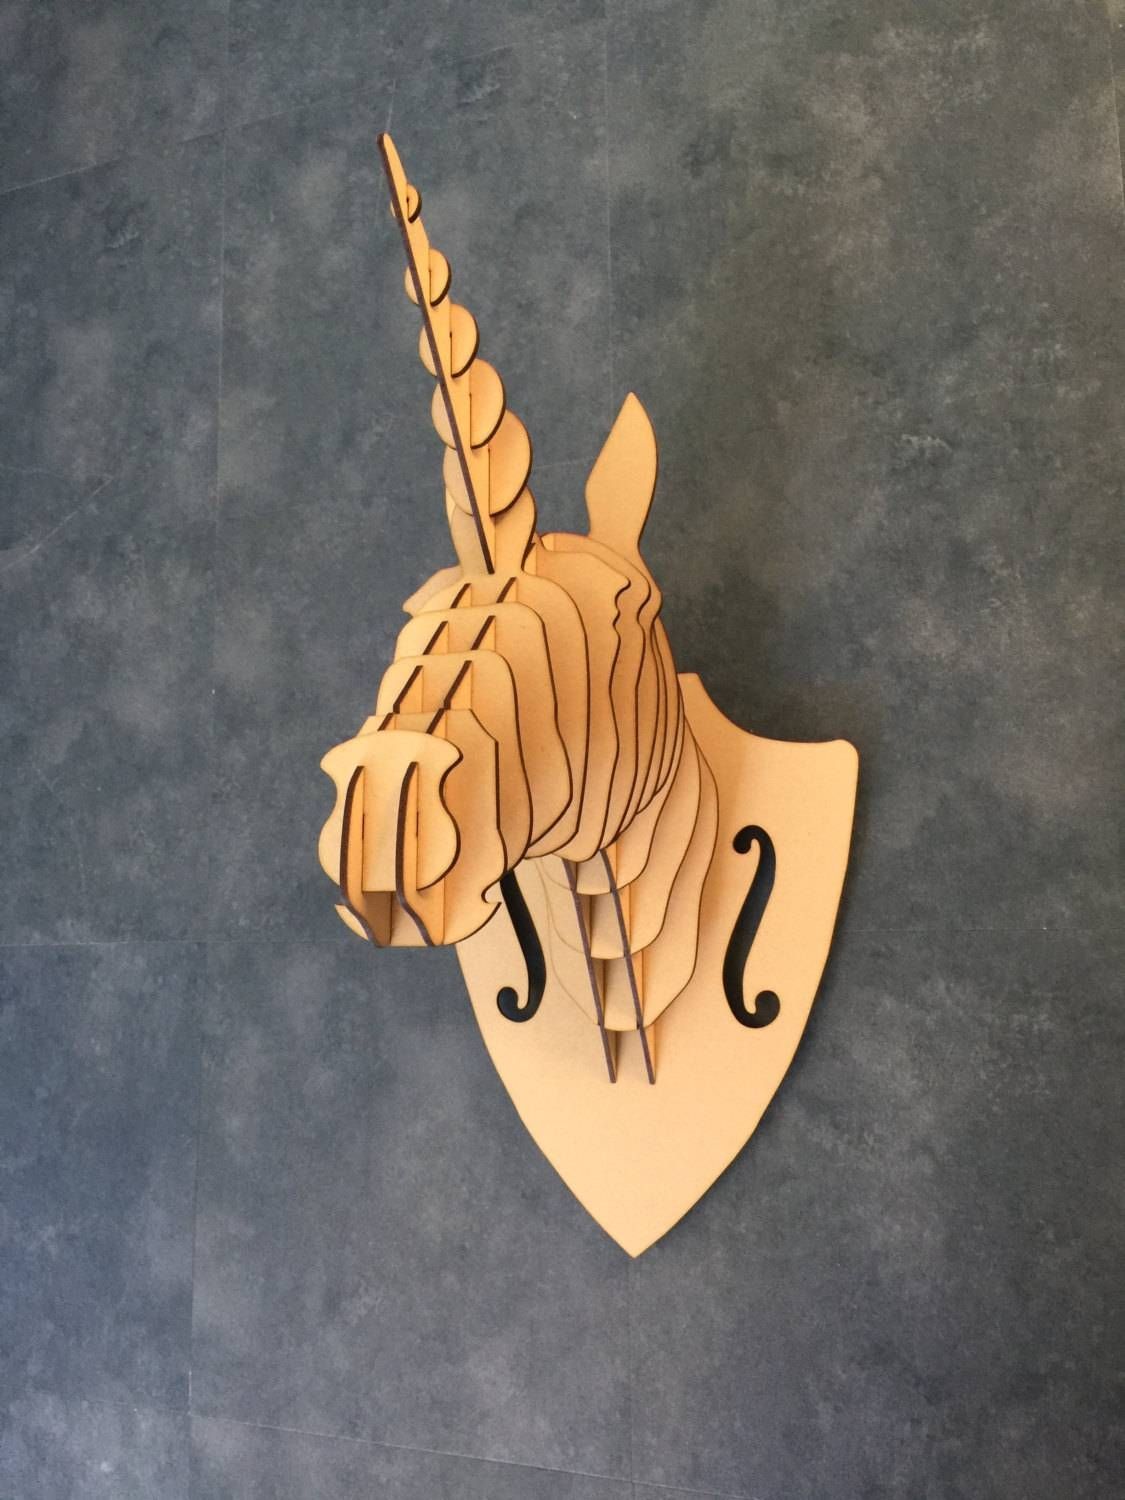 Large/ Small Wooden Unicorn Trophy Head Kit 3d Wall Art Home Within Most Popular 3d Unicorn Wall Art (View 7 of 20)